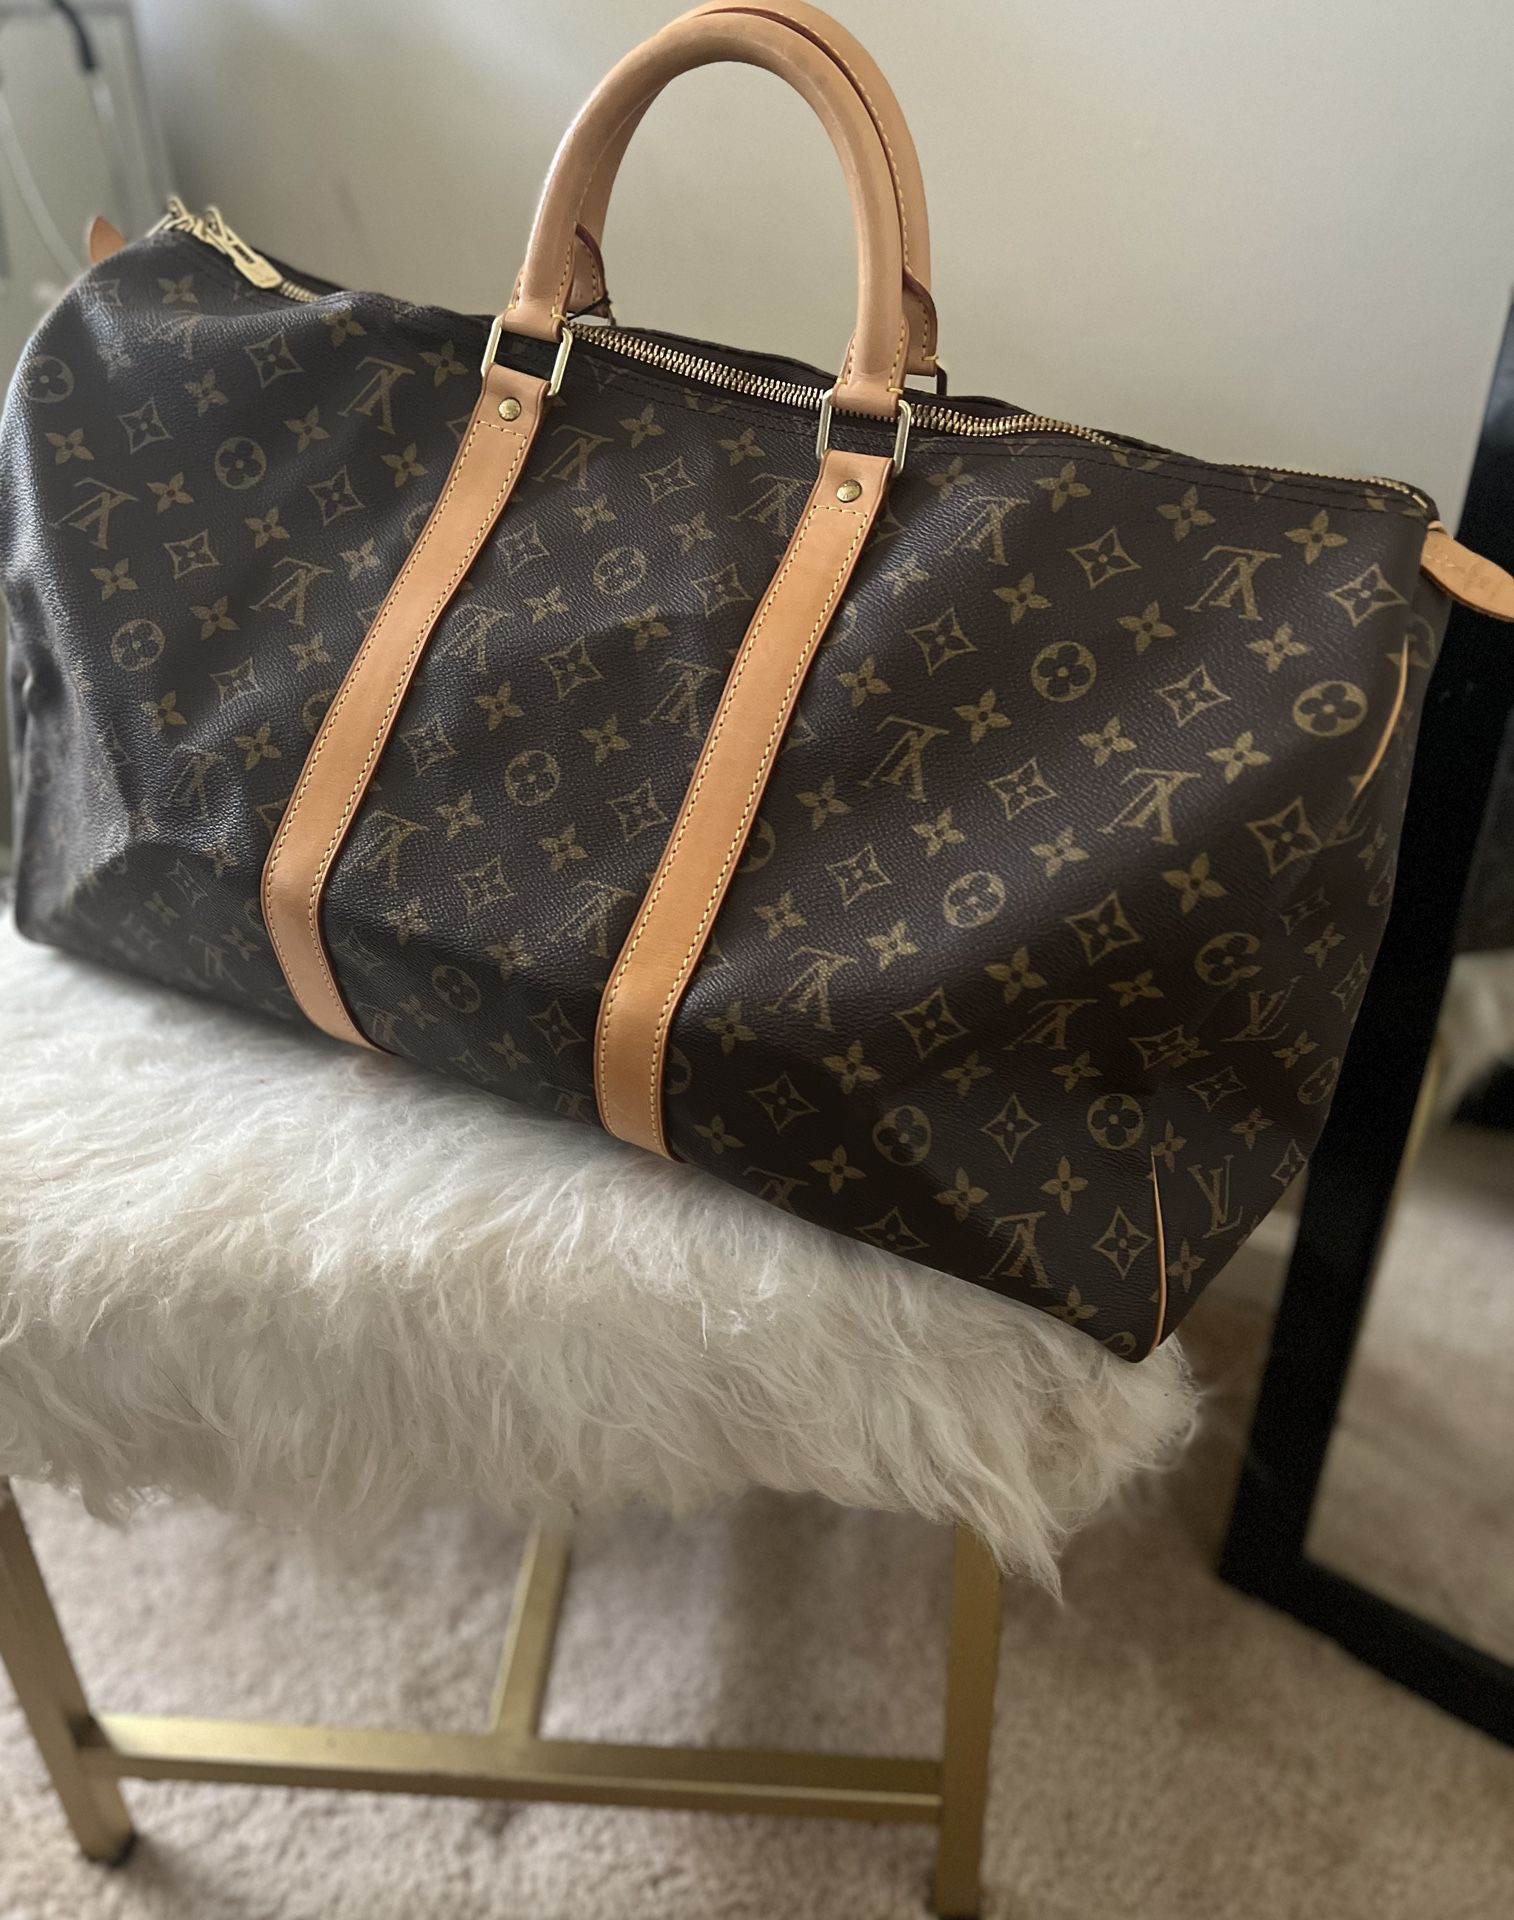 Authentic Louis Vuitton Duffle Bag for Sale in Stone Mountain, GA